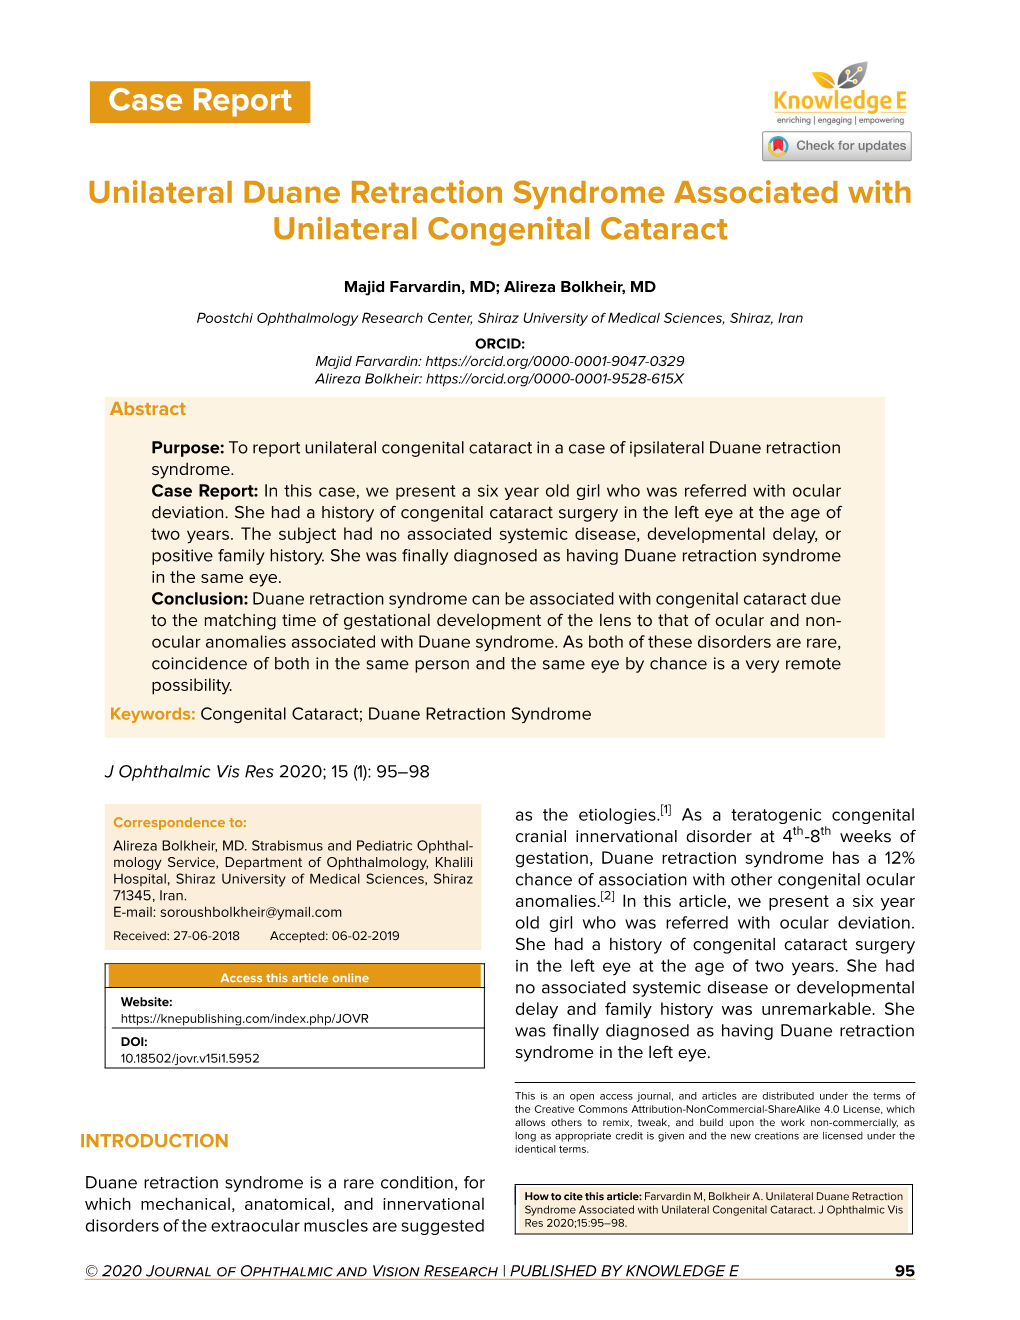 Unilateral Duane Retraction Syndrome Associated with Unilateral Congenital Cataract